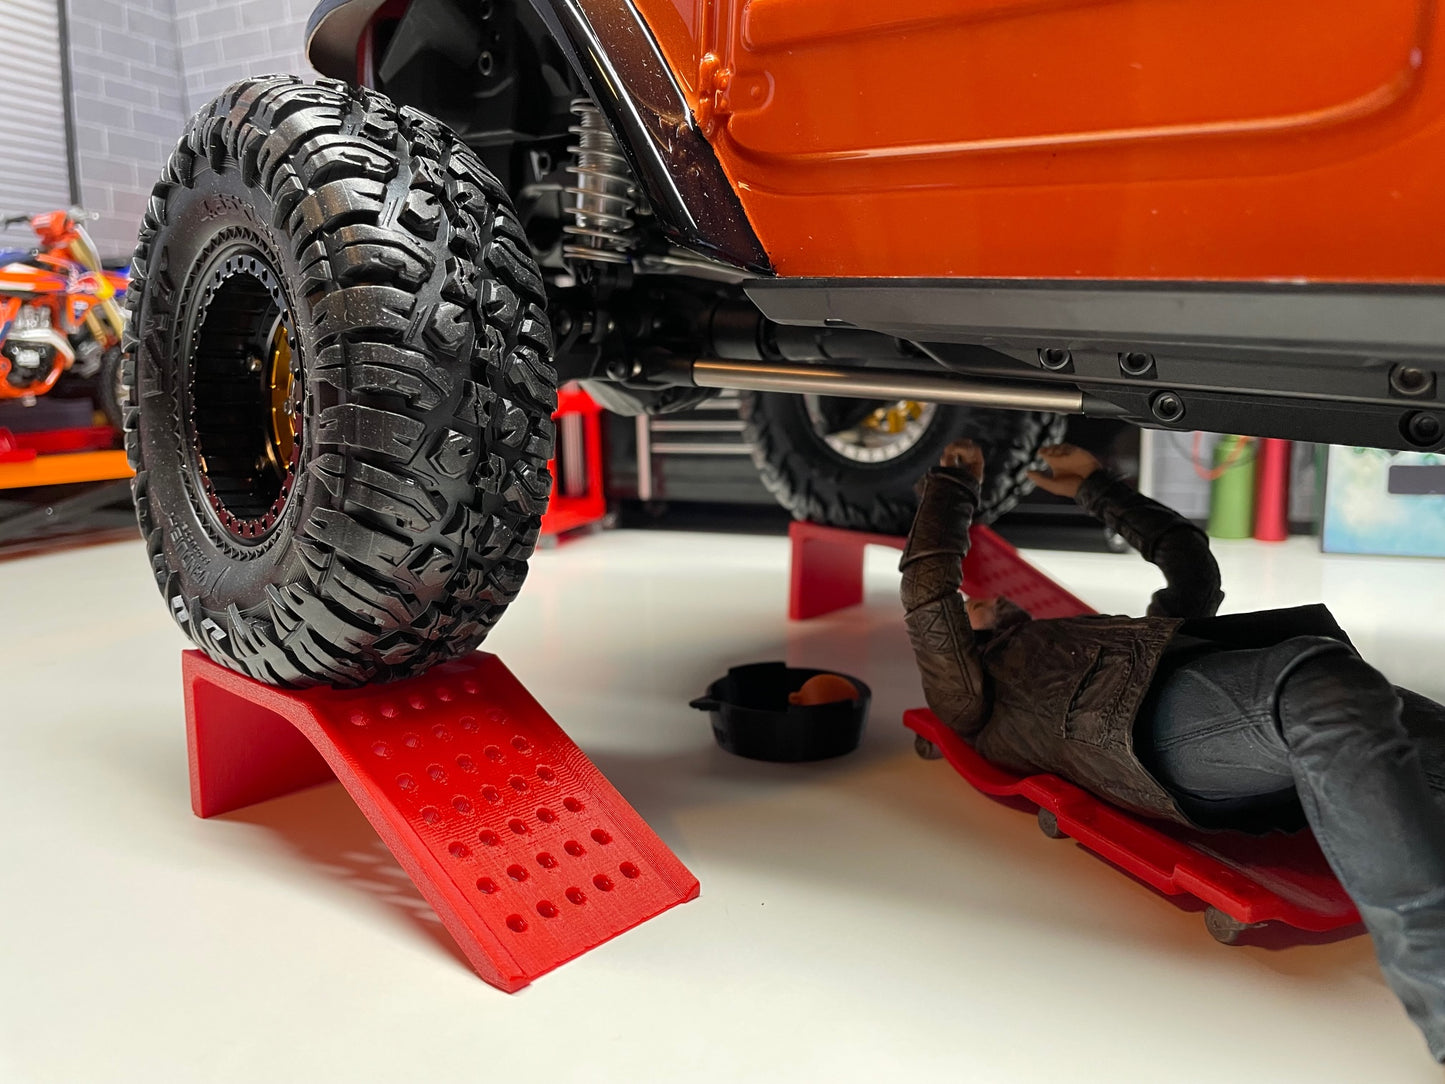 1/10th Scale Oil Change Ramp